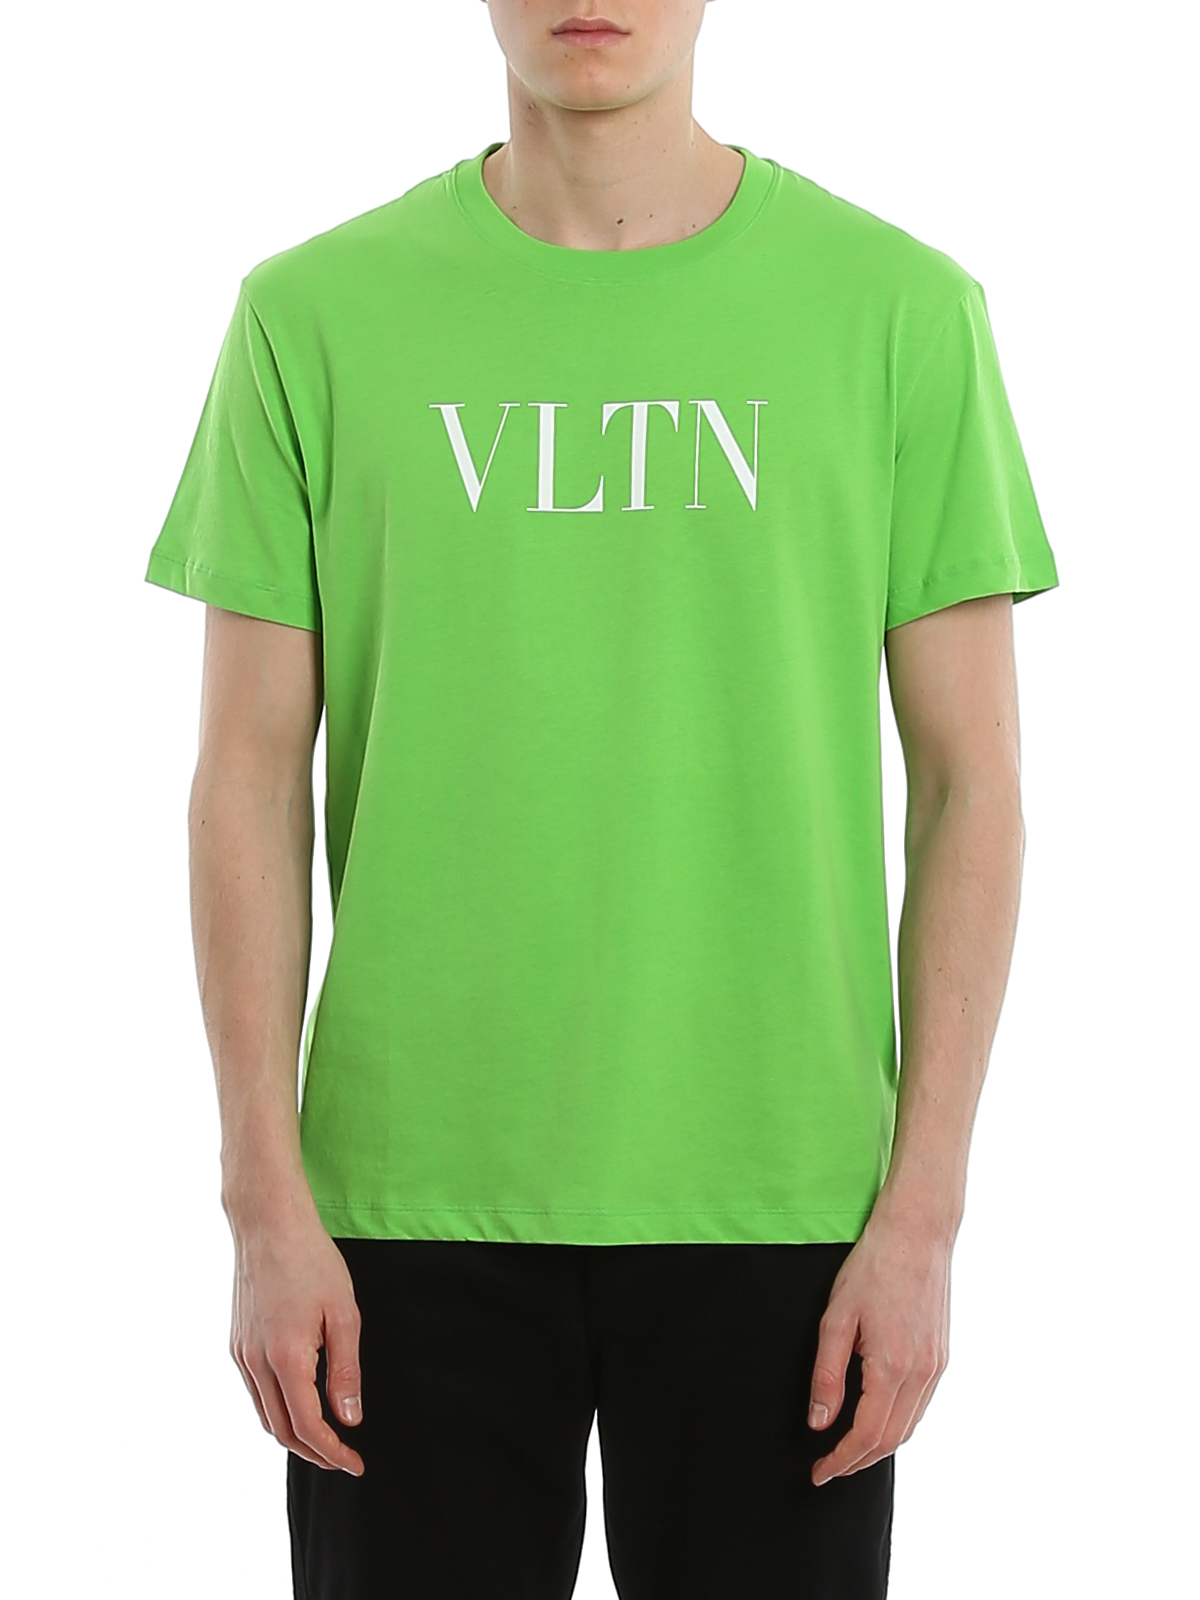 Tシャツ Valentino - Tシャツ - 緑 - TV0MG10V3LE23H | THEBS [iKRIX]